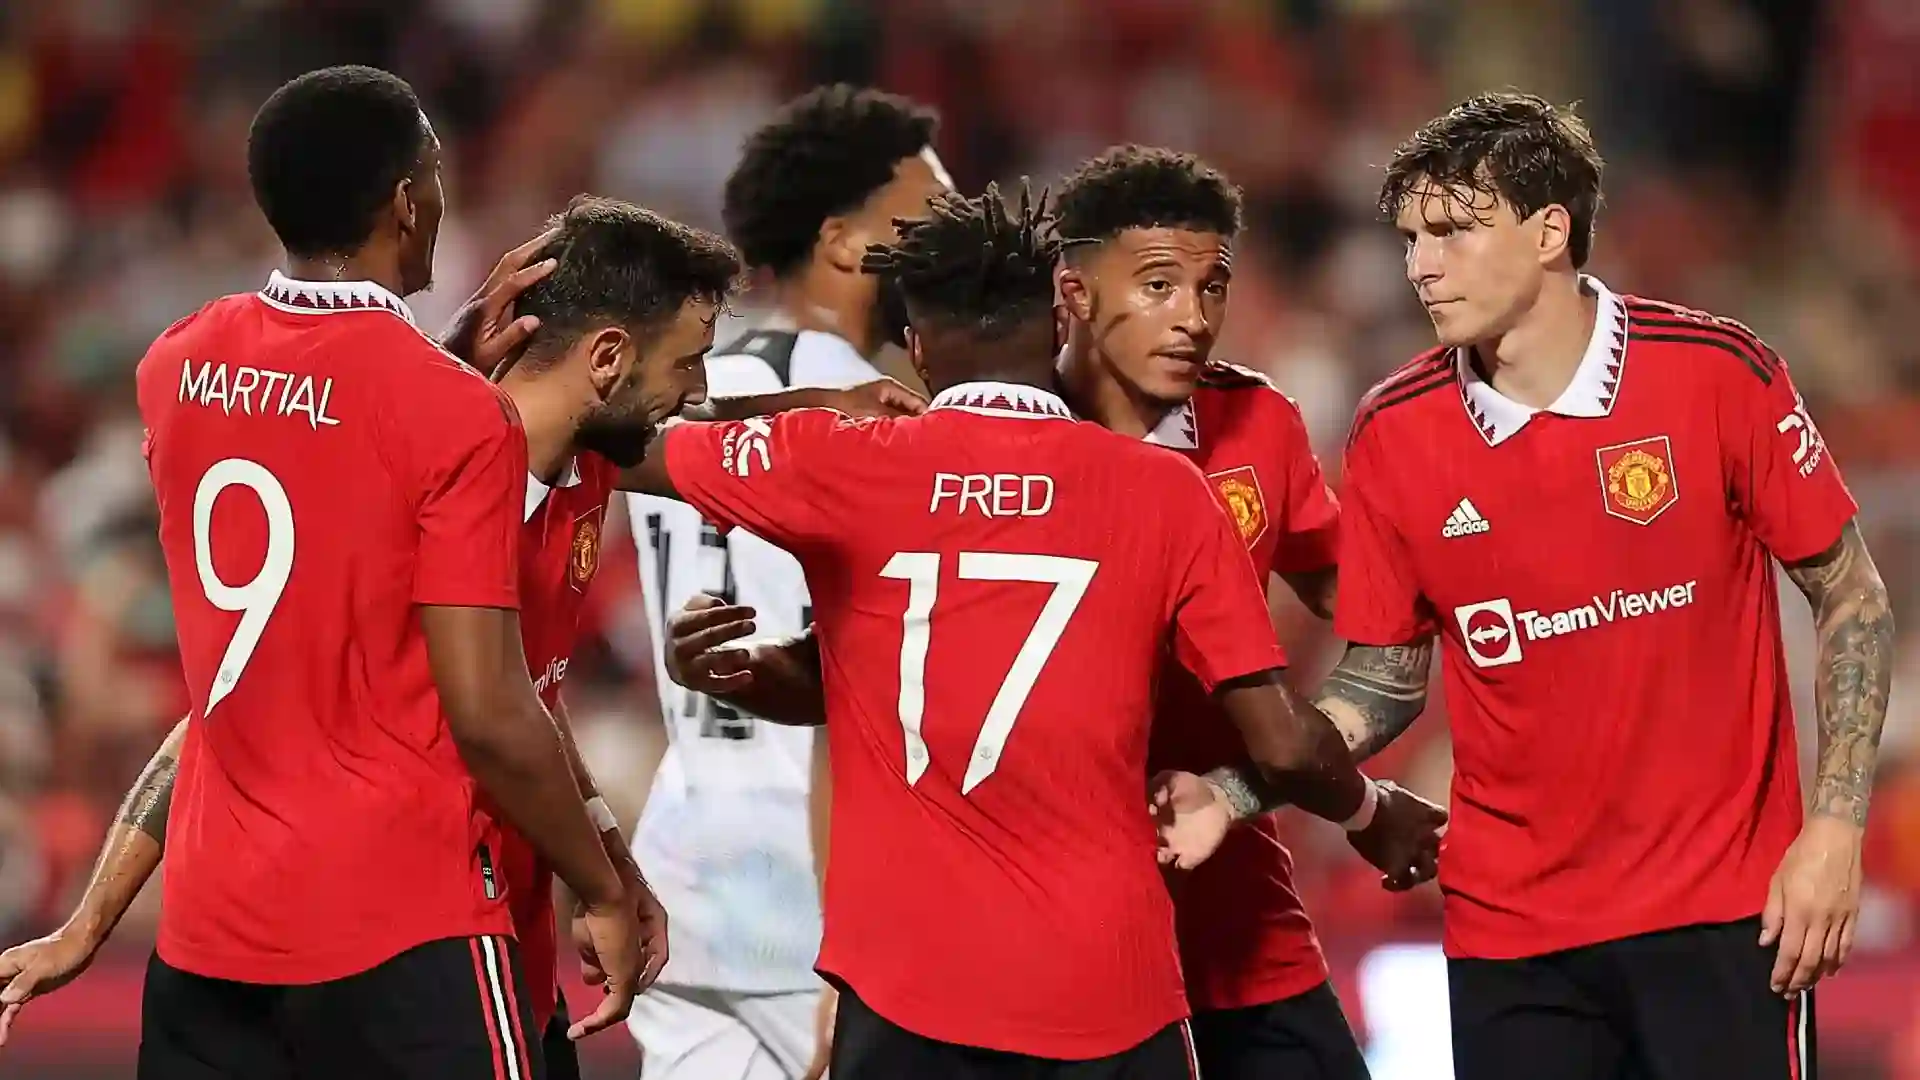 Premier League: Manchester United predicted line up against Liverpool